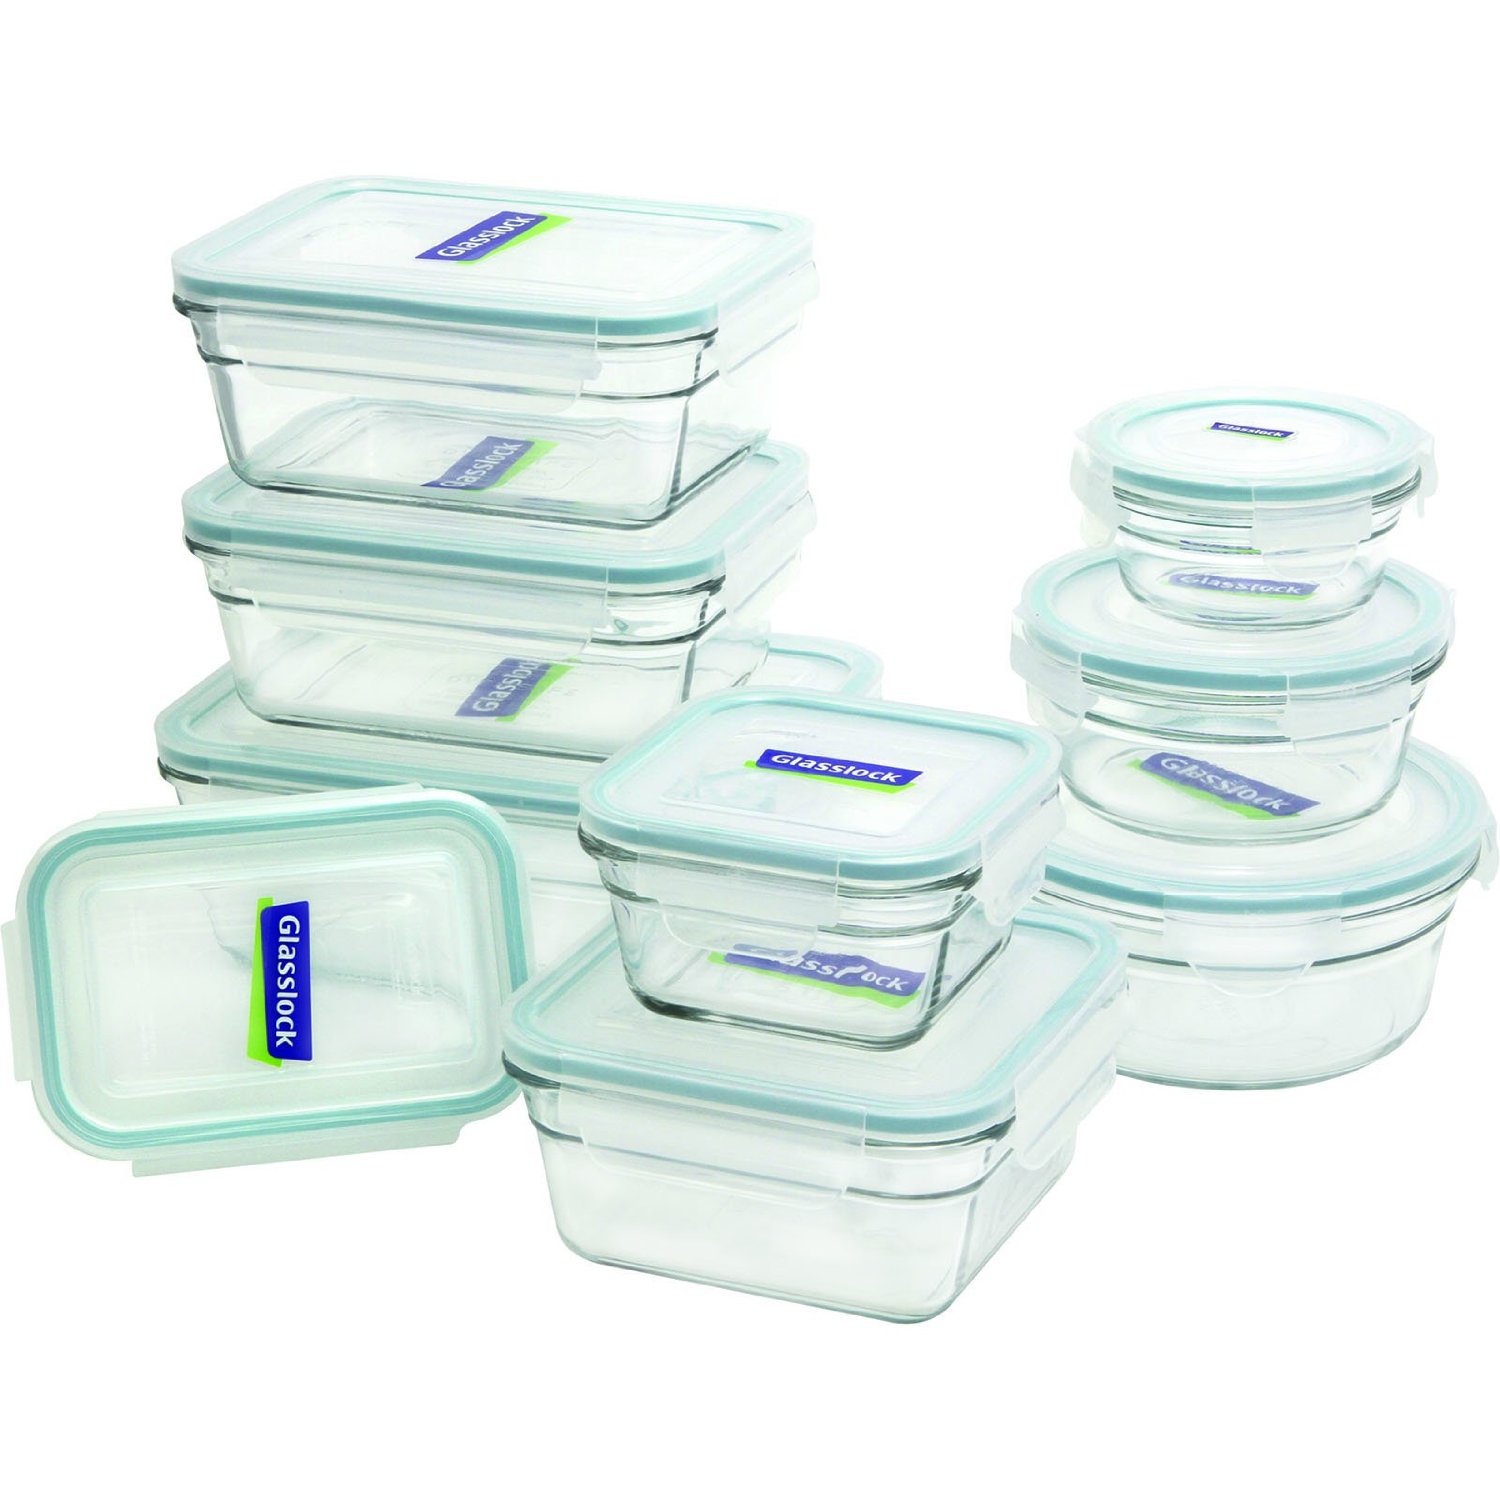 Glasslock 18-Piece Assorted Oven Safe Container Set – Just $25.99!